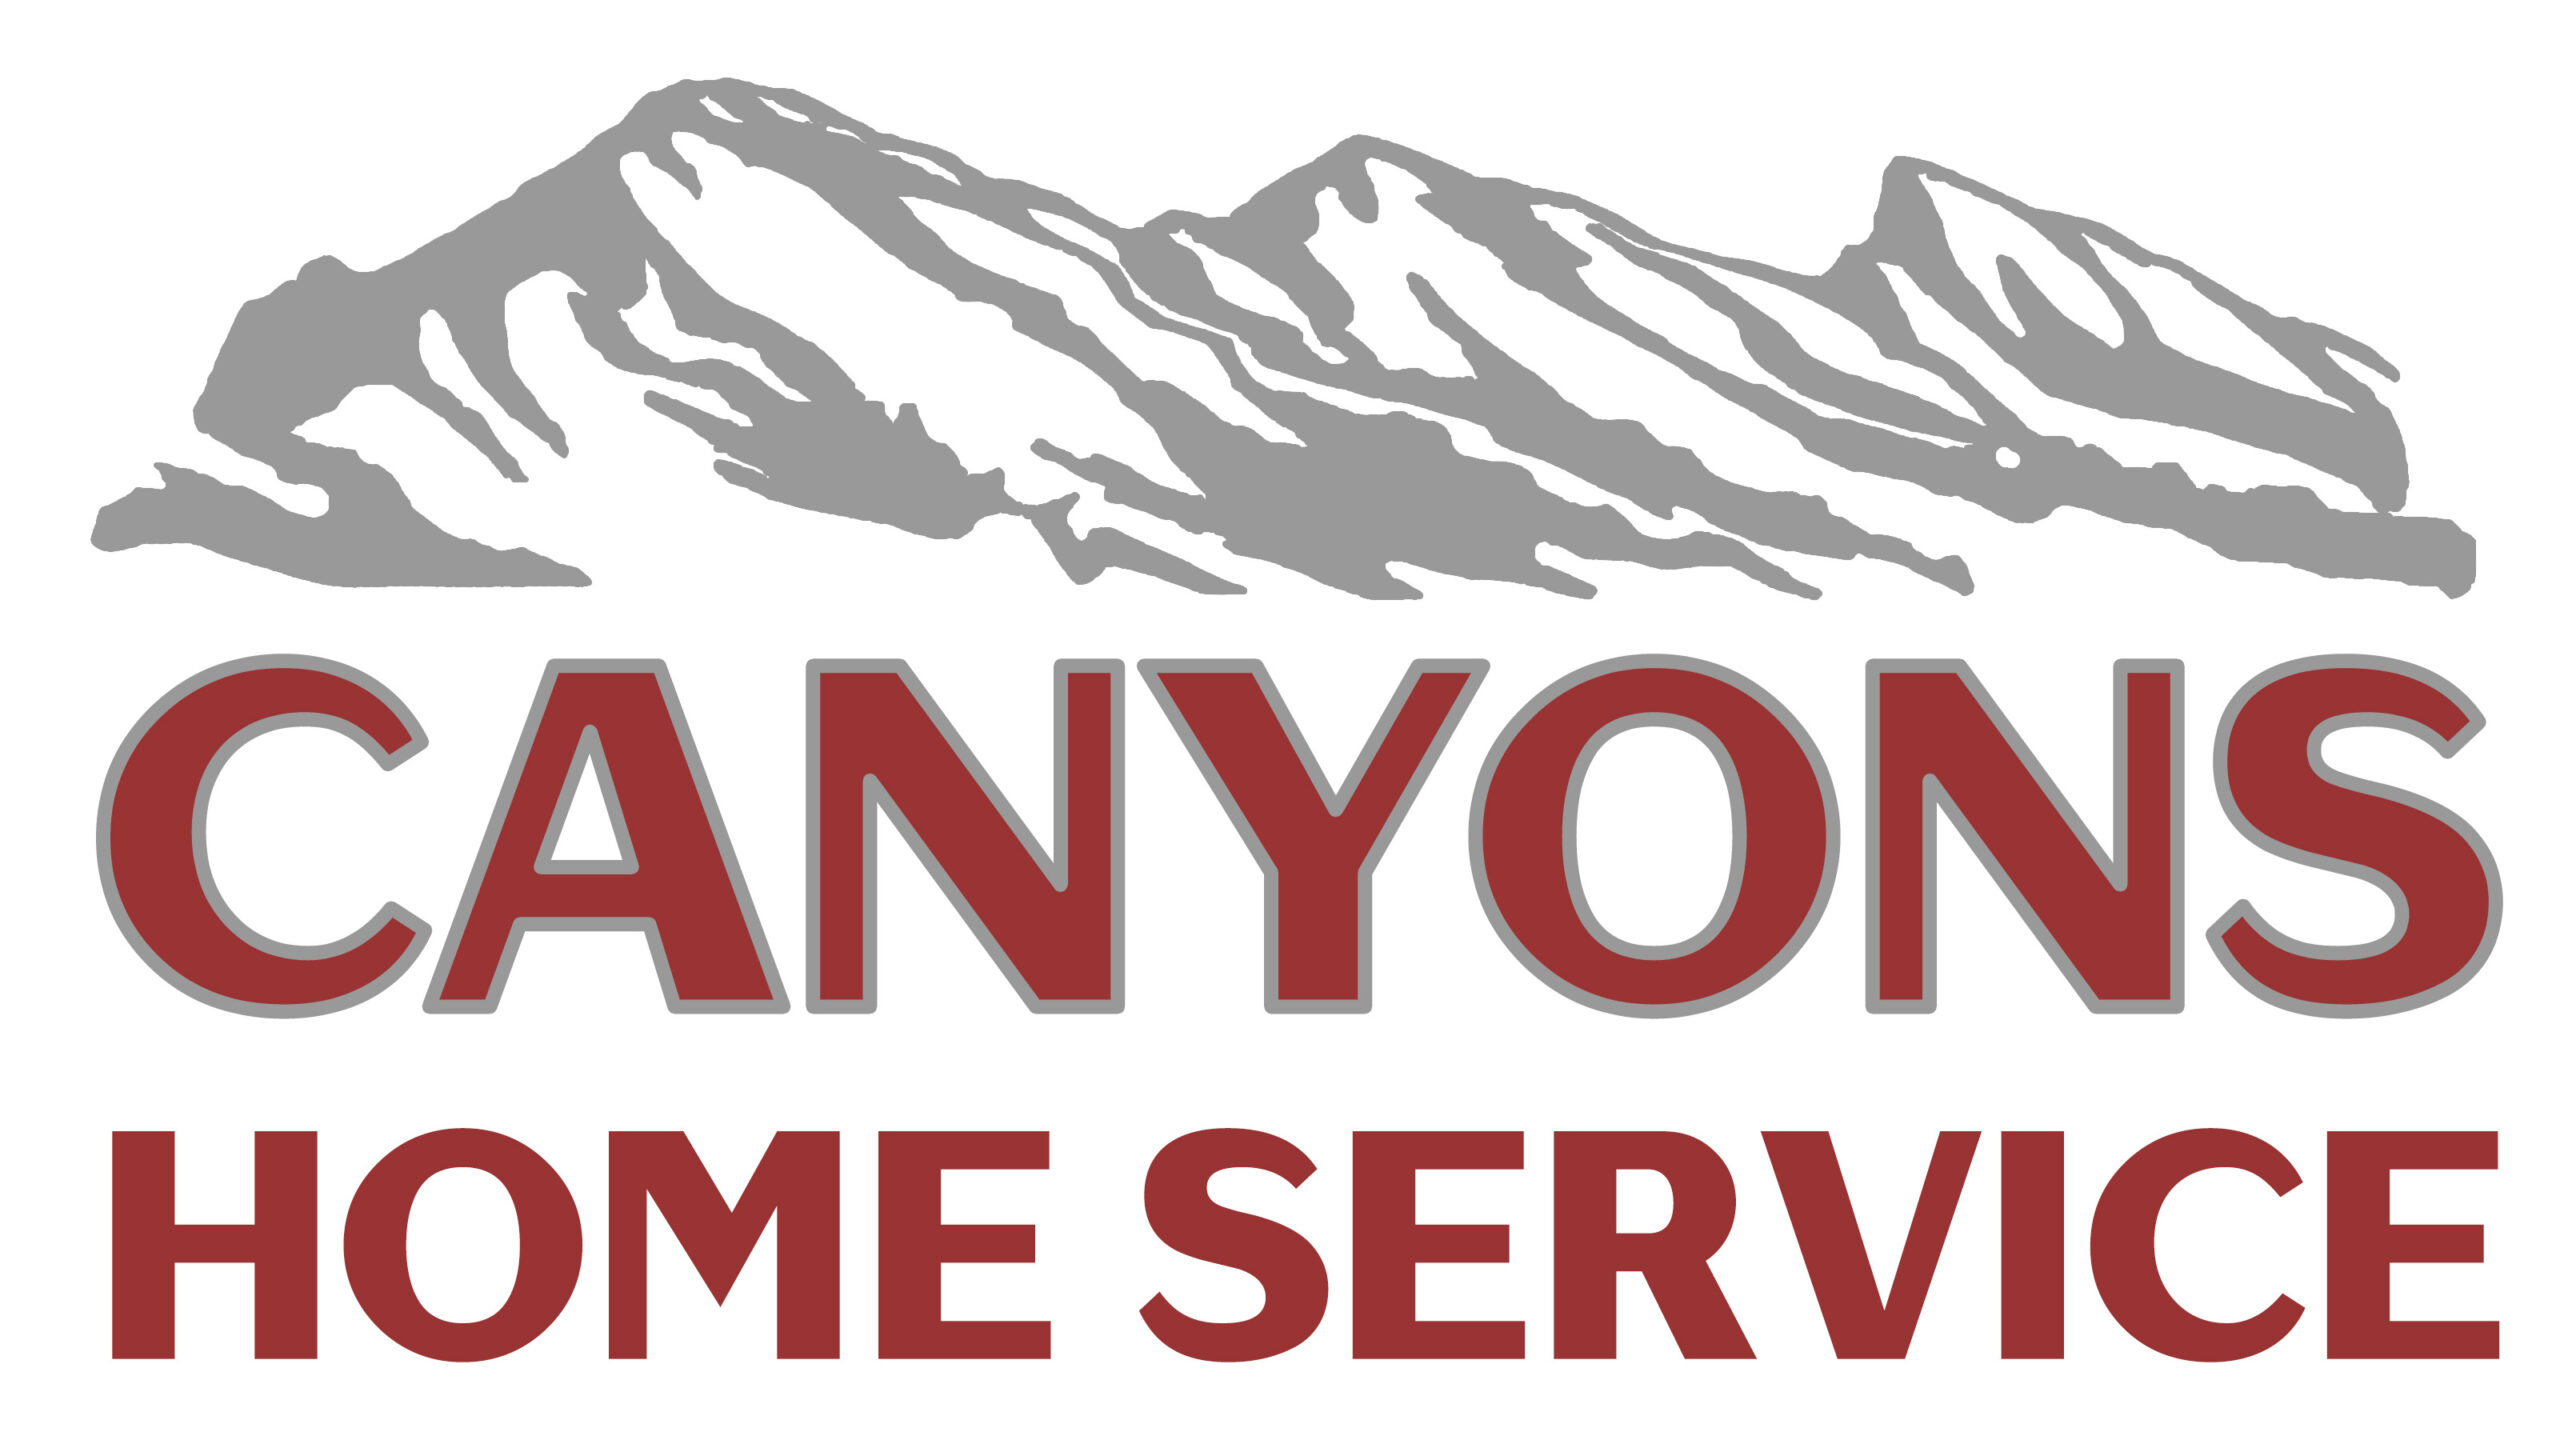 Canyons Home Service